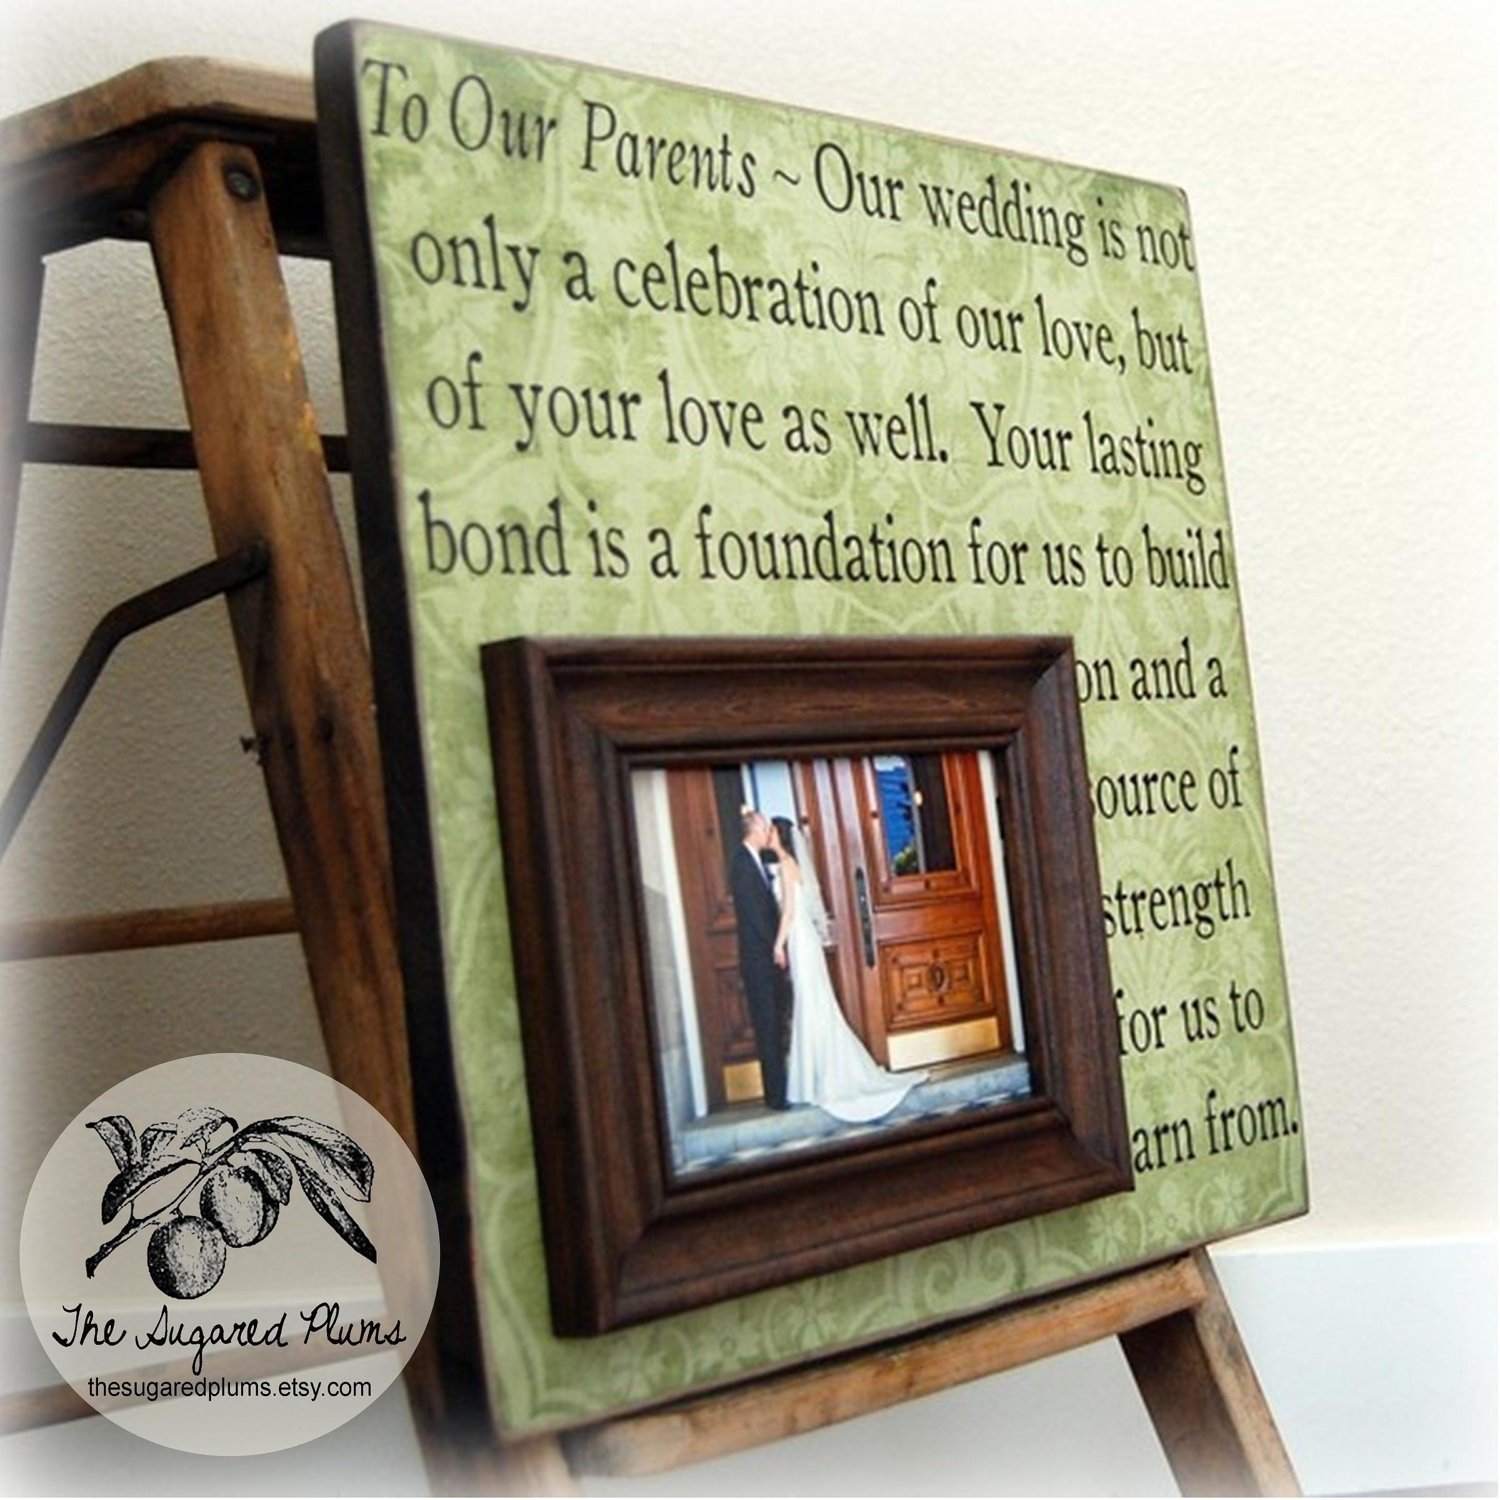 10 Lovable Wedding Gifts For Parents Ideas ideas for 50th wedding anniversary gifts for parents unique weding 2022